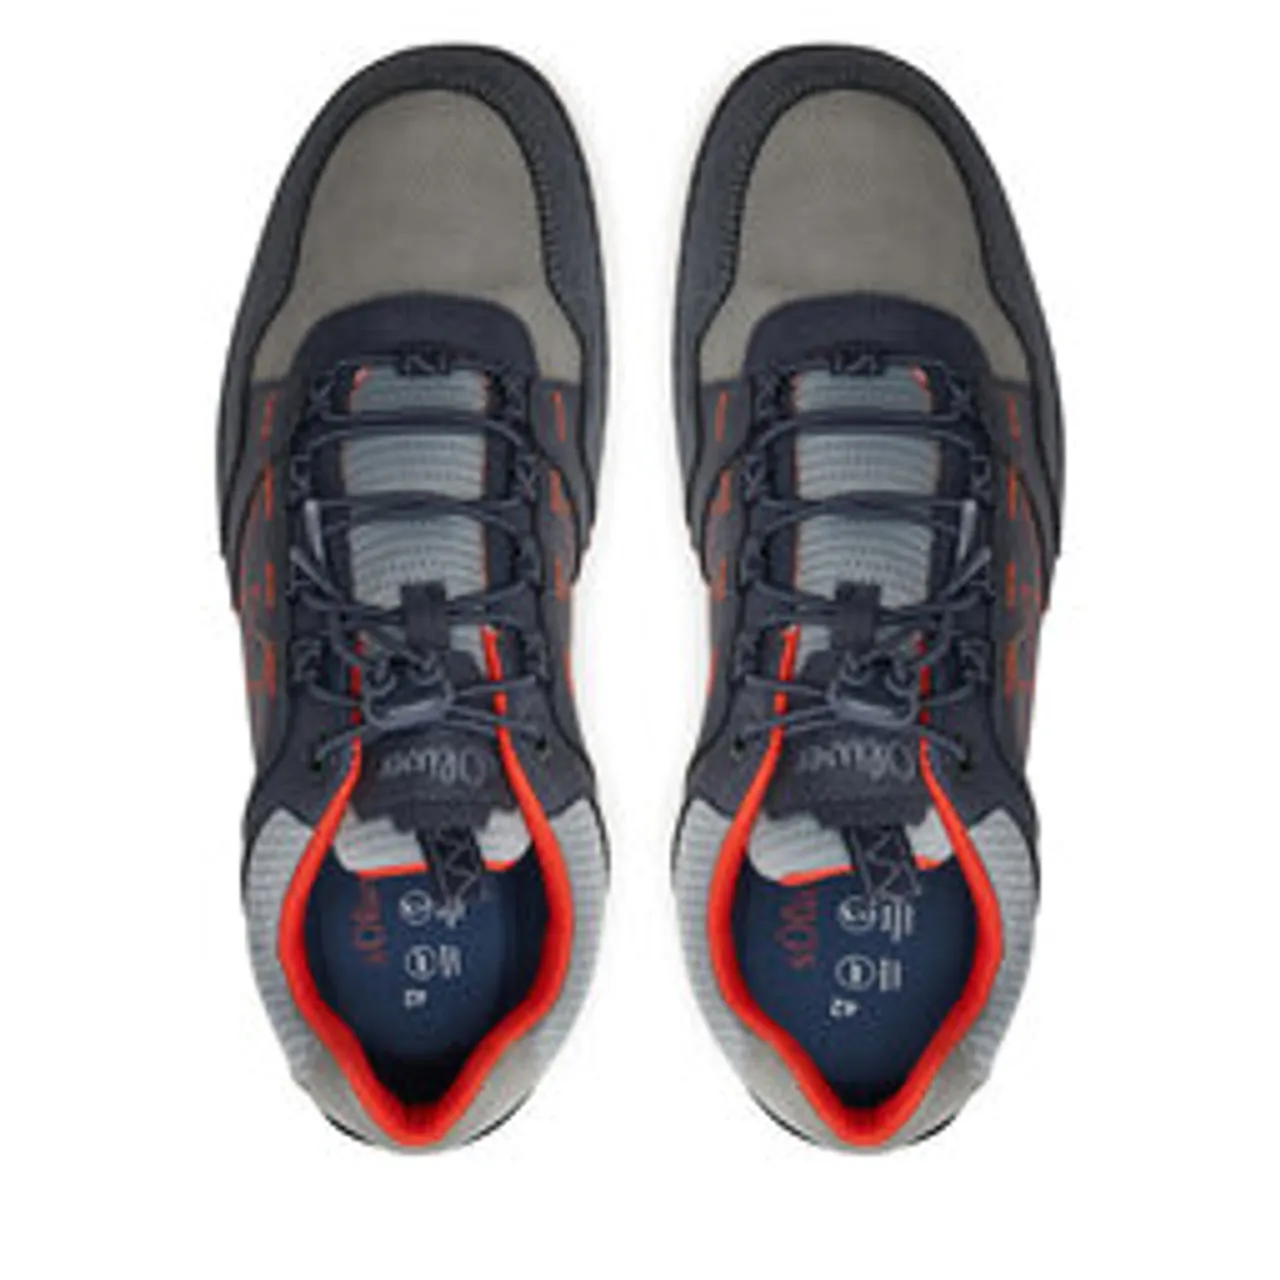 Sneakers s.Oliver 5-13649-42 Navy Comb. 891